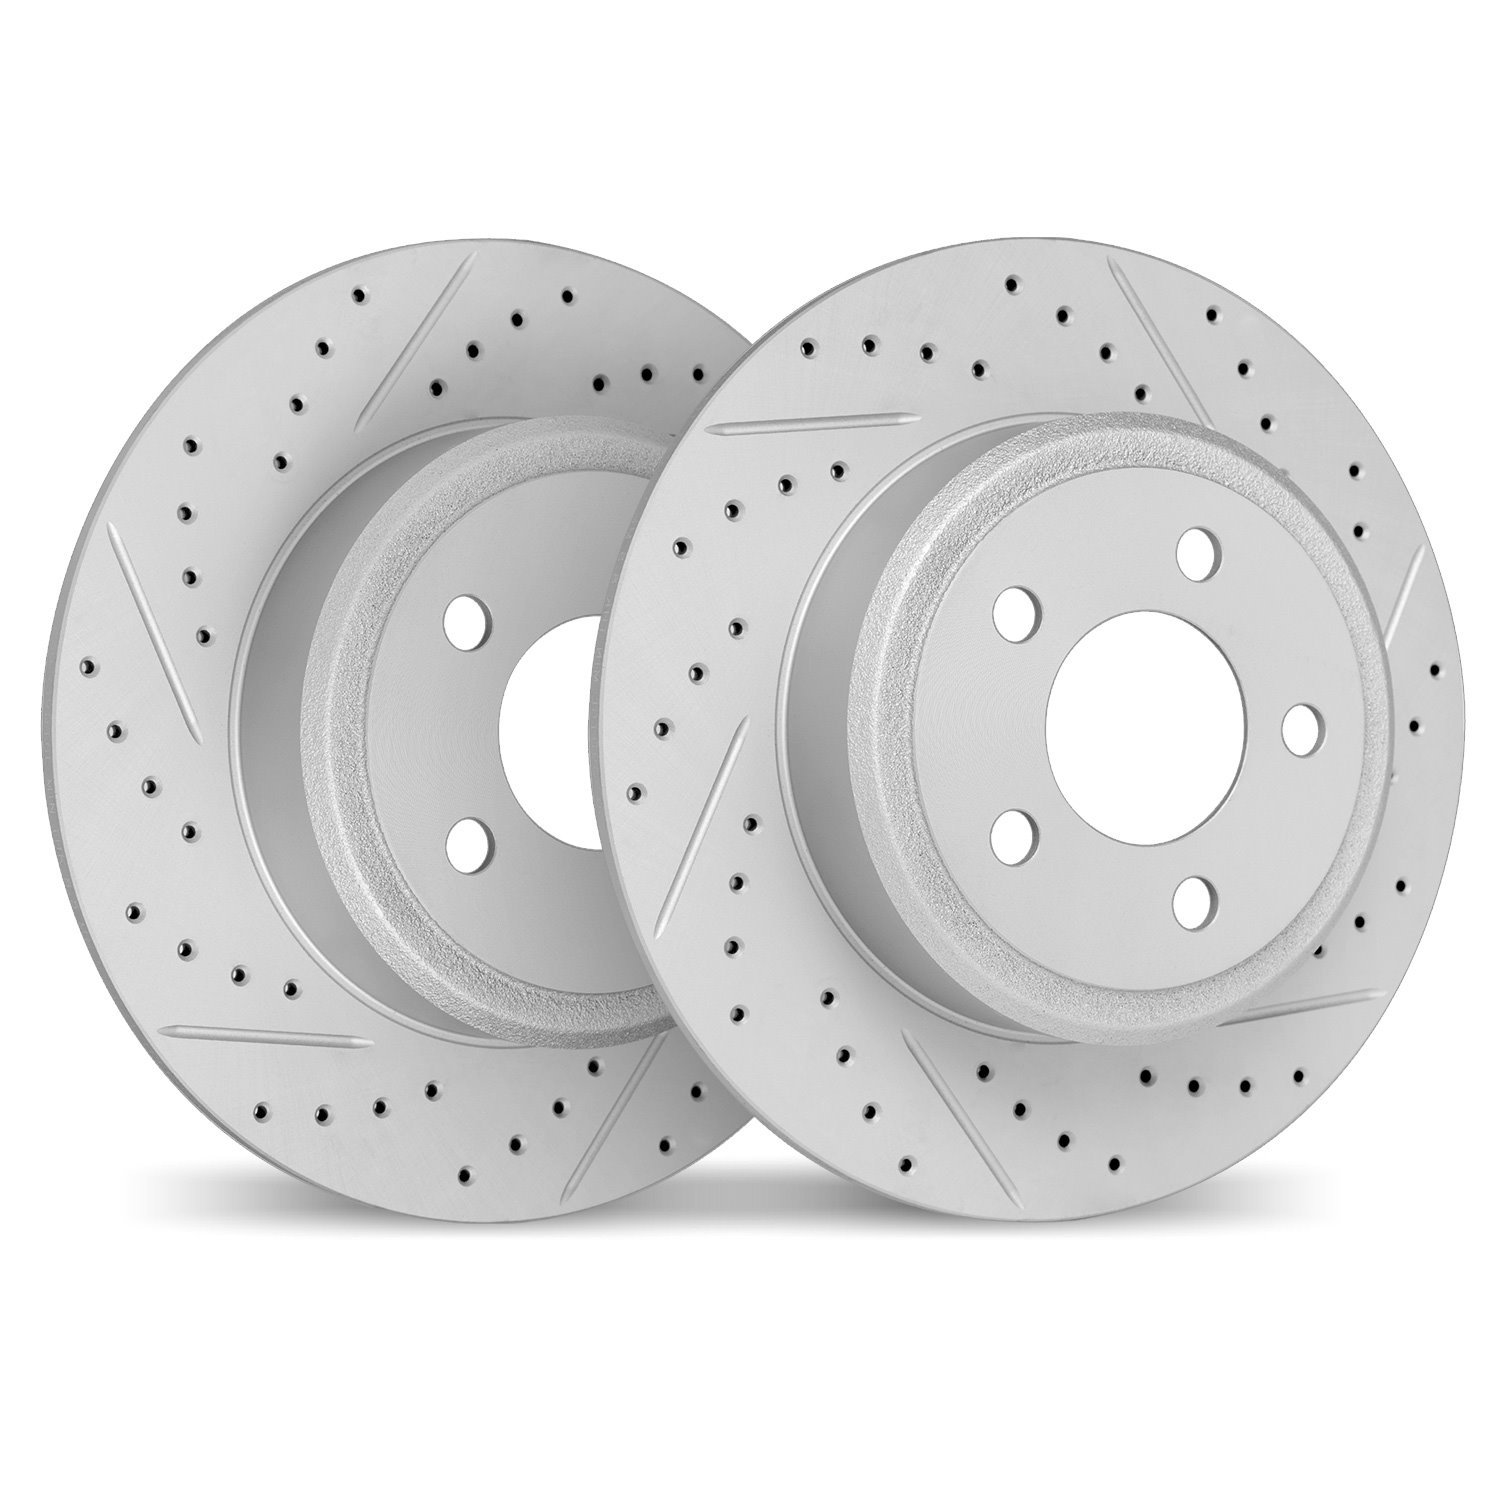 2002-59053 Geoperformance Drilled/Slotted Brake Rotors, Fits Select Acura/Honda, Position: Rear